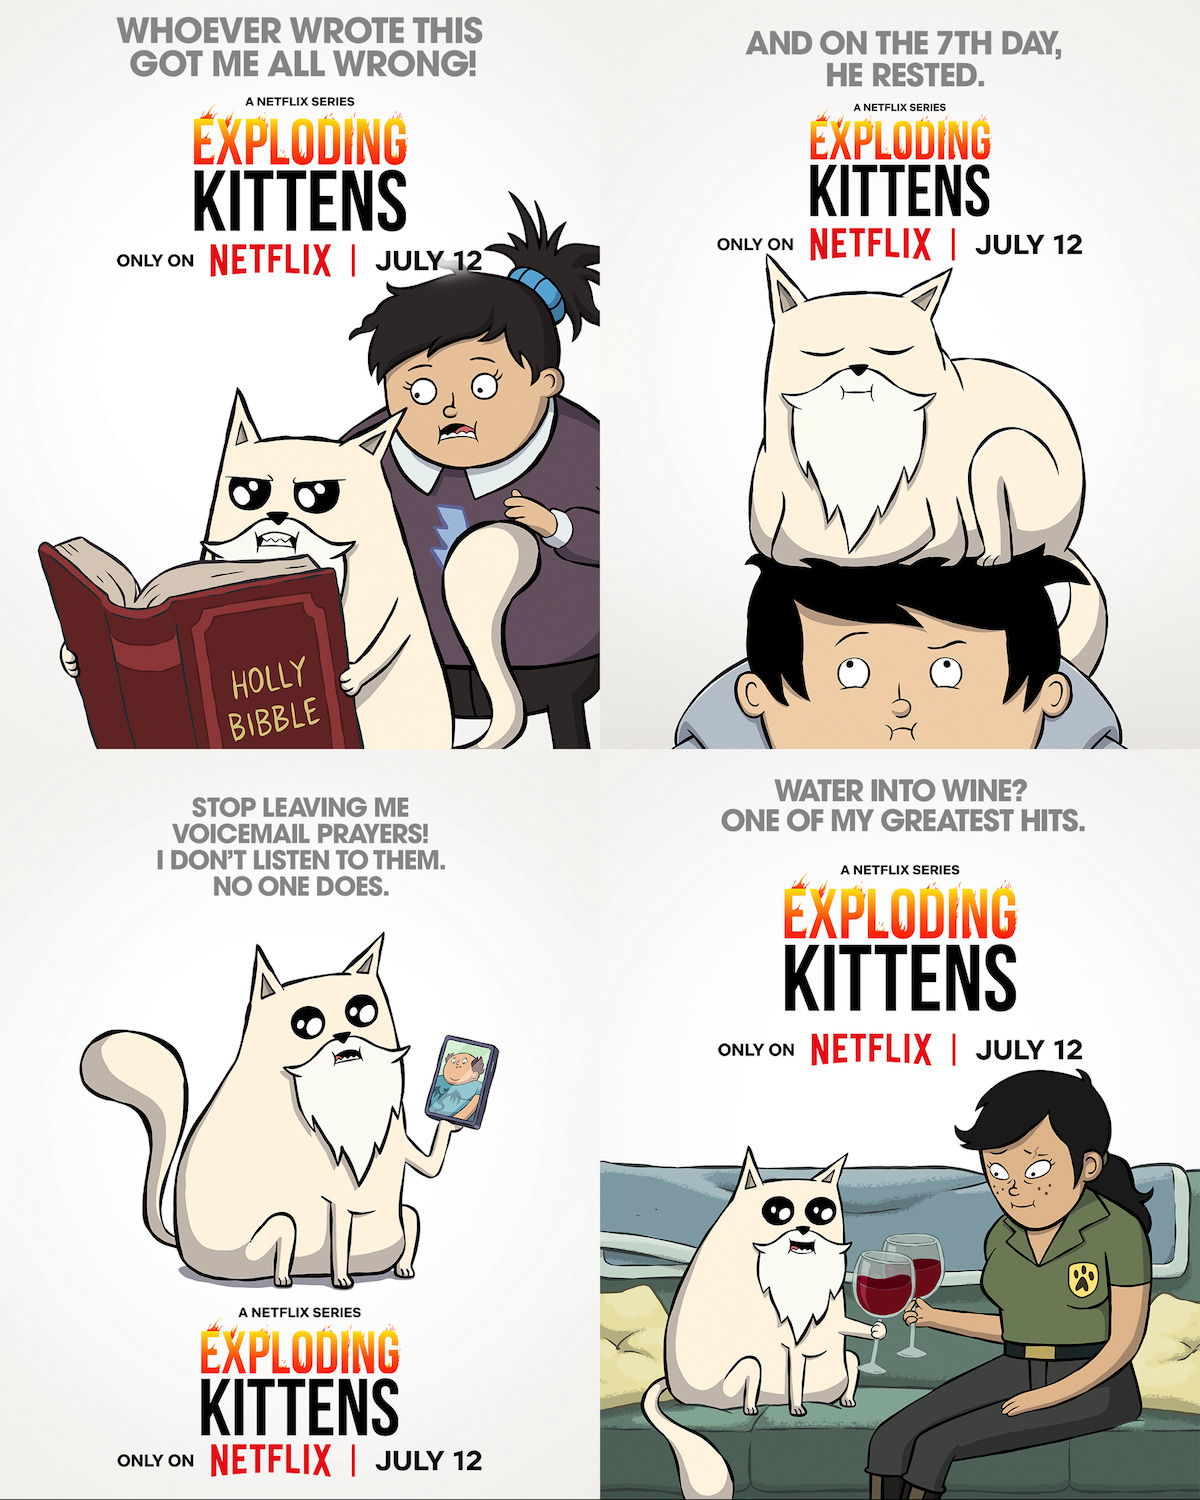 Exploding Kittens animation posters